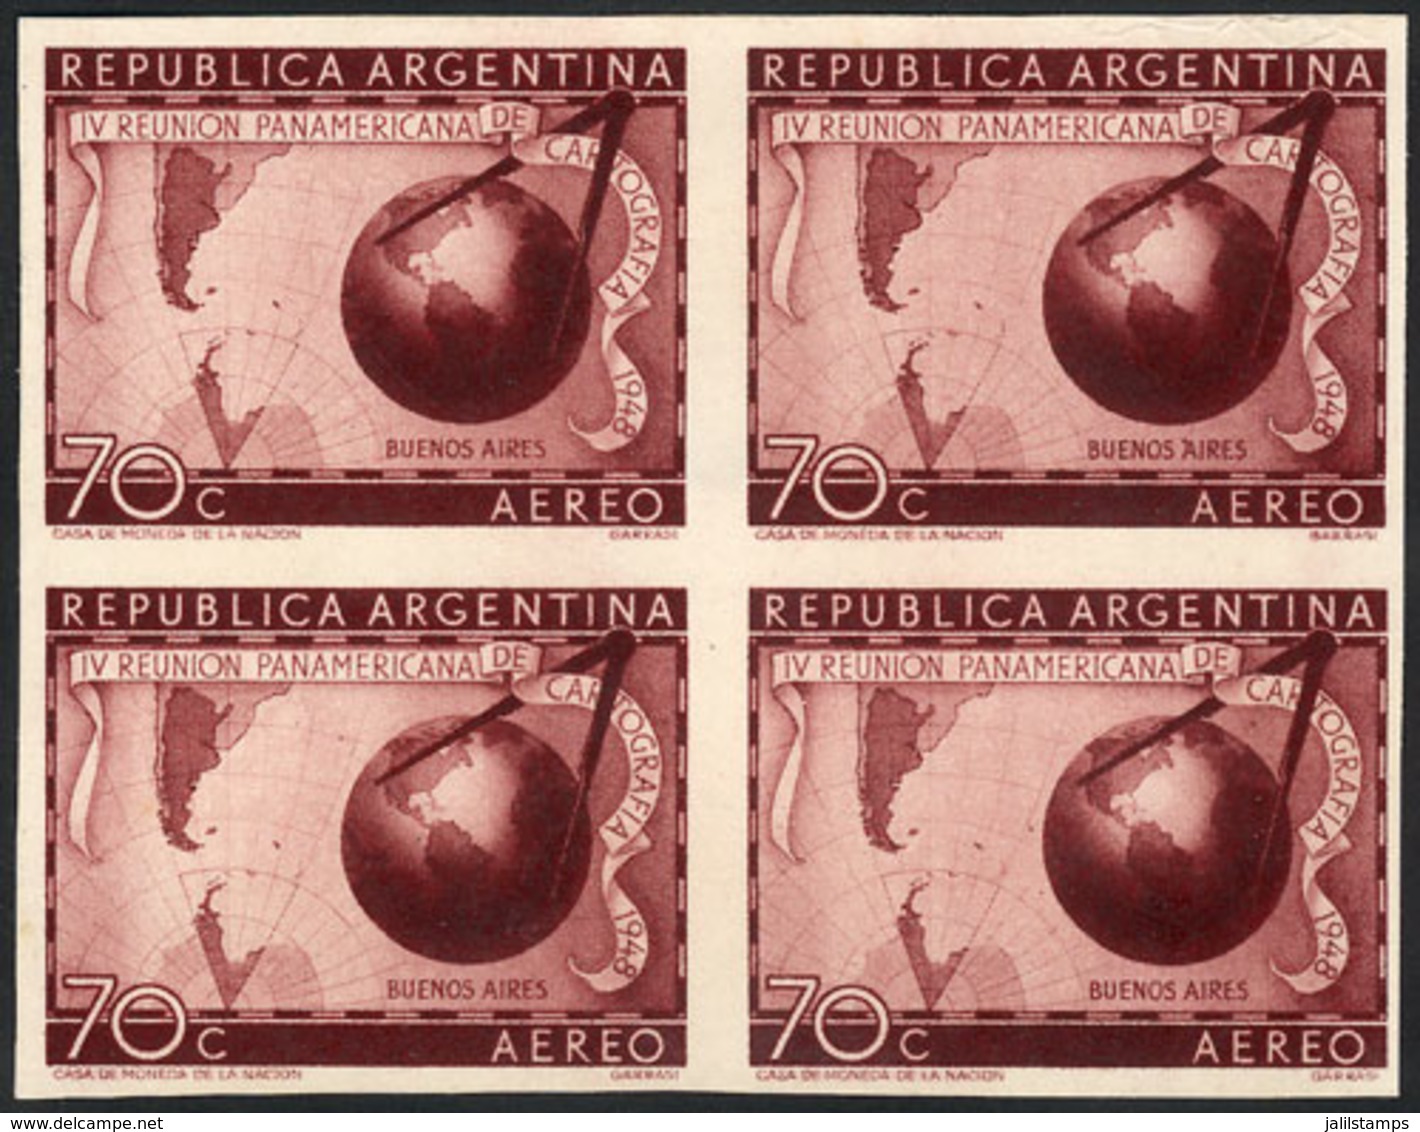 ARGENTINA: GJ.962, 1949 Cartography, PROOF In Chestnut-lilac, Imperforate Block Of 4 Printed On Opaque Paper, Minor Defe - Posta Aerea